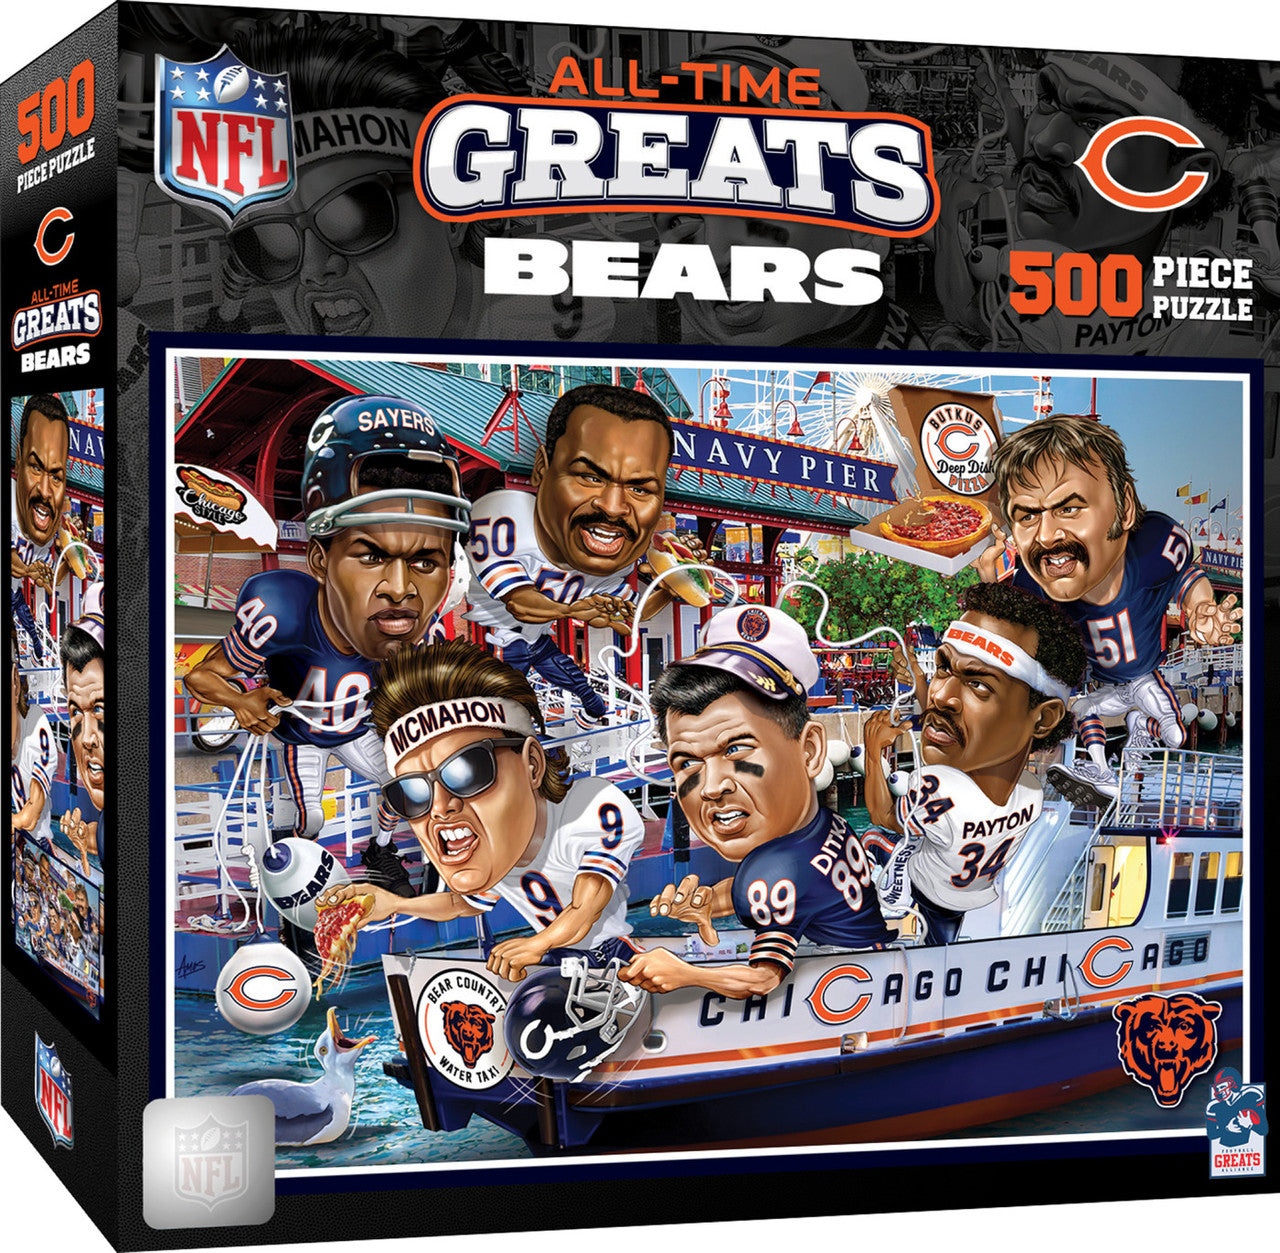 Chicago Bears All-Time Greats 500 Piece Puzzle